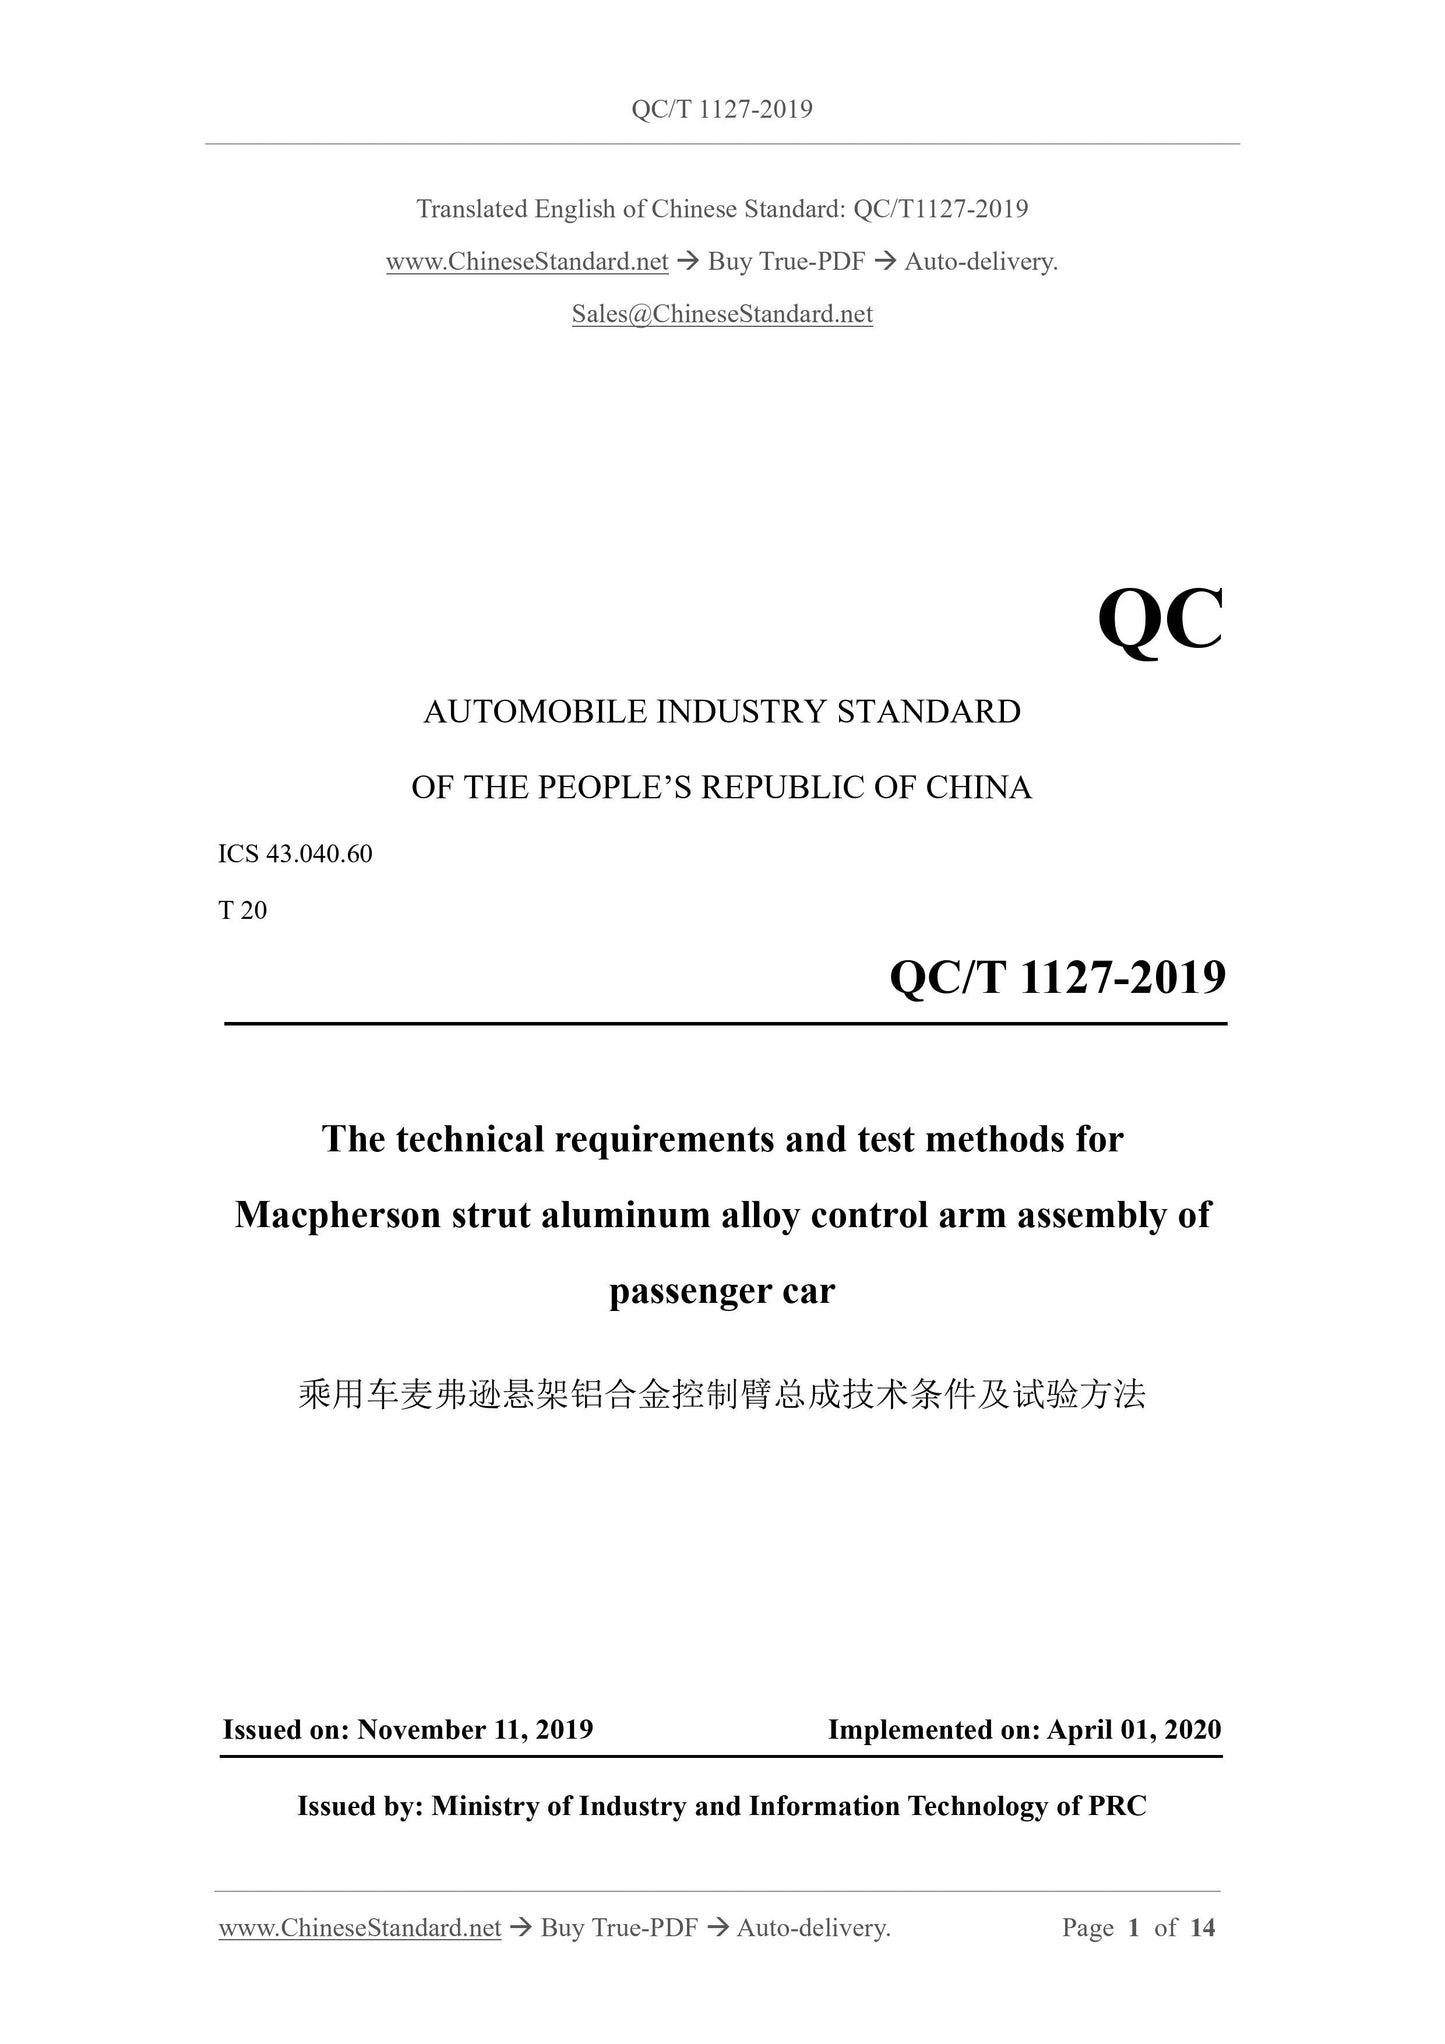 QC/T 1127-2019 Page 1